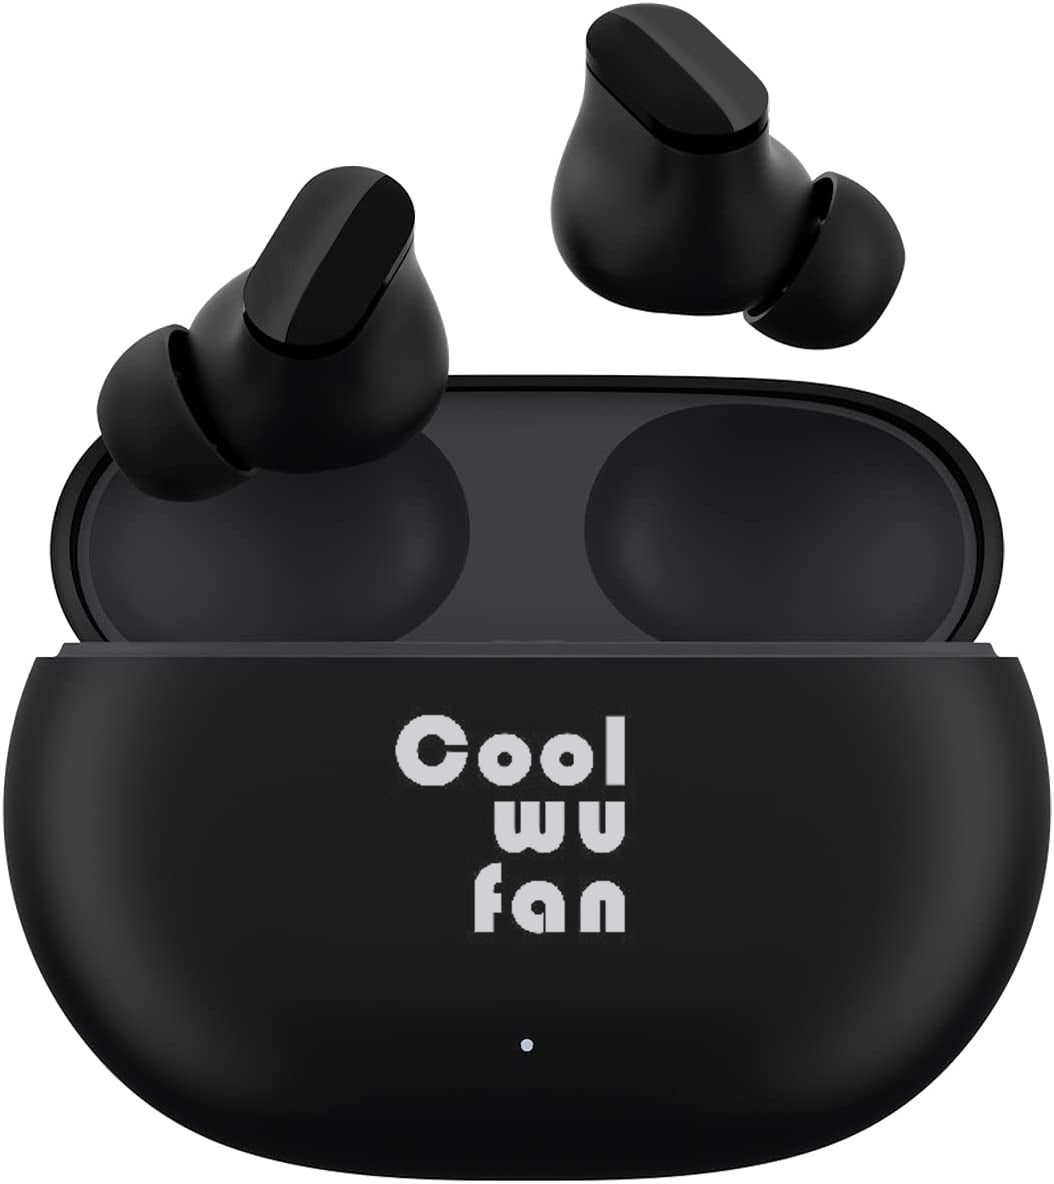 COOLWUFAN Studio Buds – True Wireless Noise Cancelling Earbuds – Compatible with Apple & Android, Built-in Microphone, IPX4 Rating, Sweat Resistant Earphones, Class 1 Bluetooth Headphones - Black